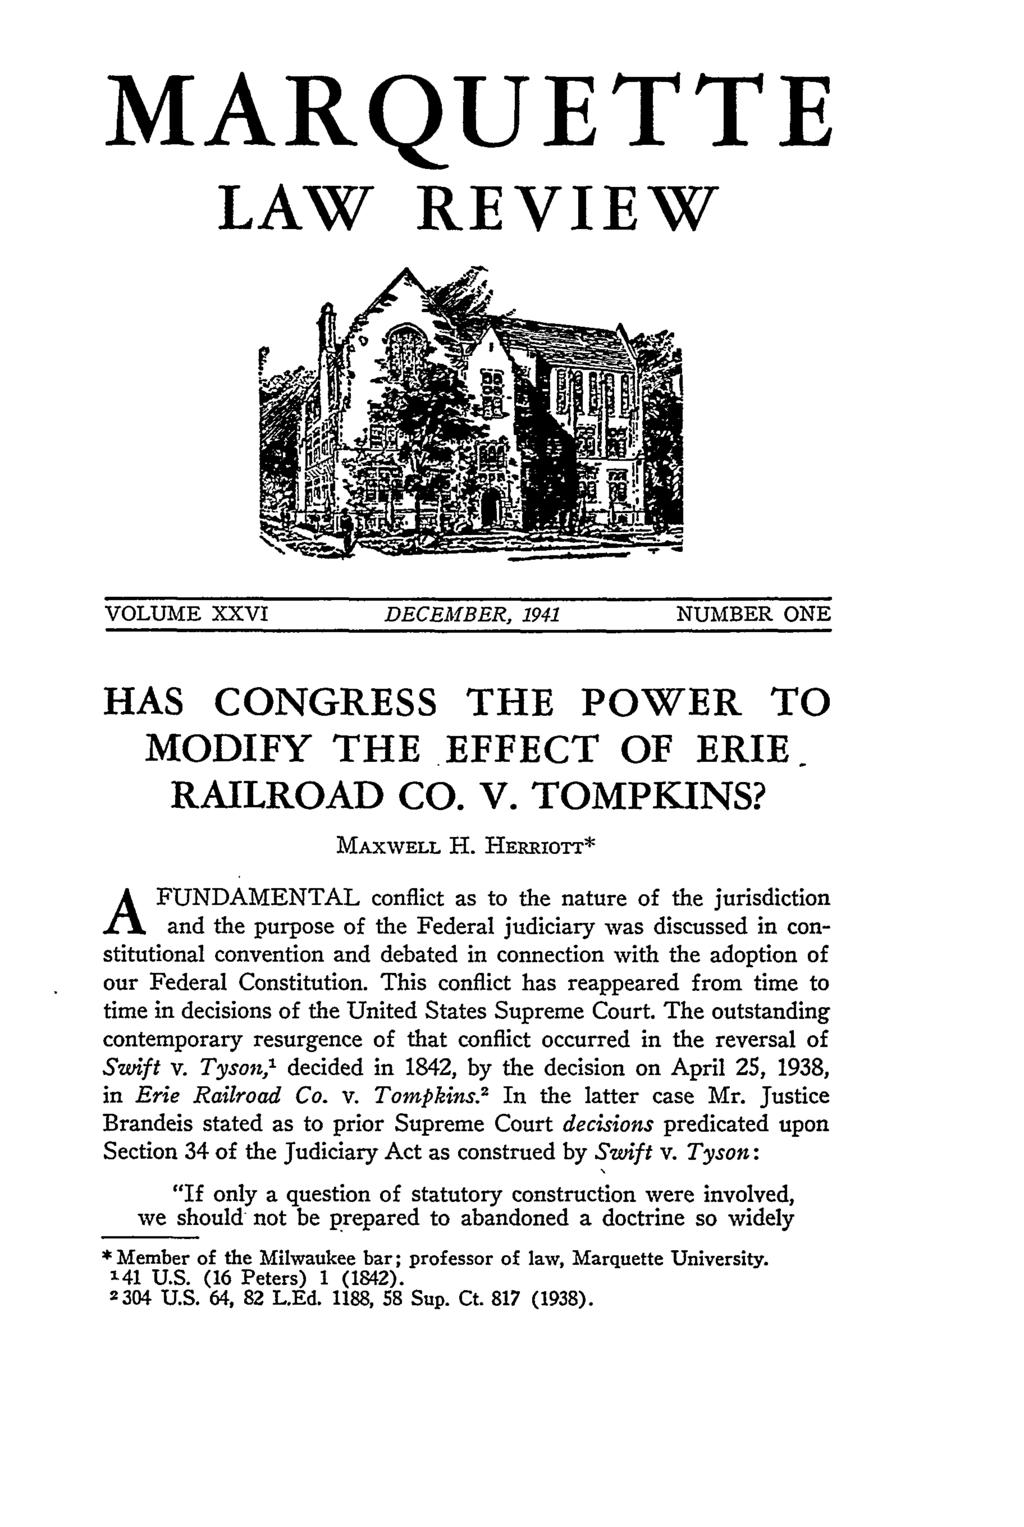 MARQUETTE LAW REVIEW VOLUME XXVI DECEMBER, 1941 NUMBER ONE HAS CONGRESS THE POWER TO MODIFY THE EFFECT OF ERIE RAILROAD CO. V. TOMPKINS? MAXWELL H.